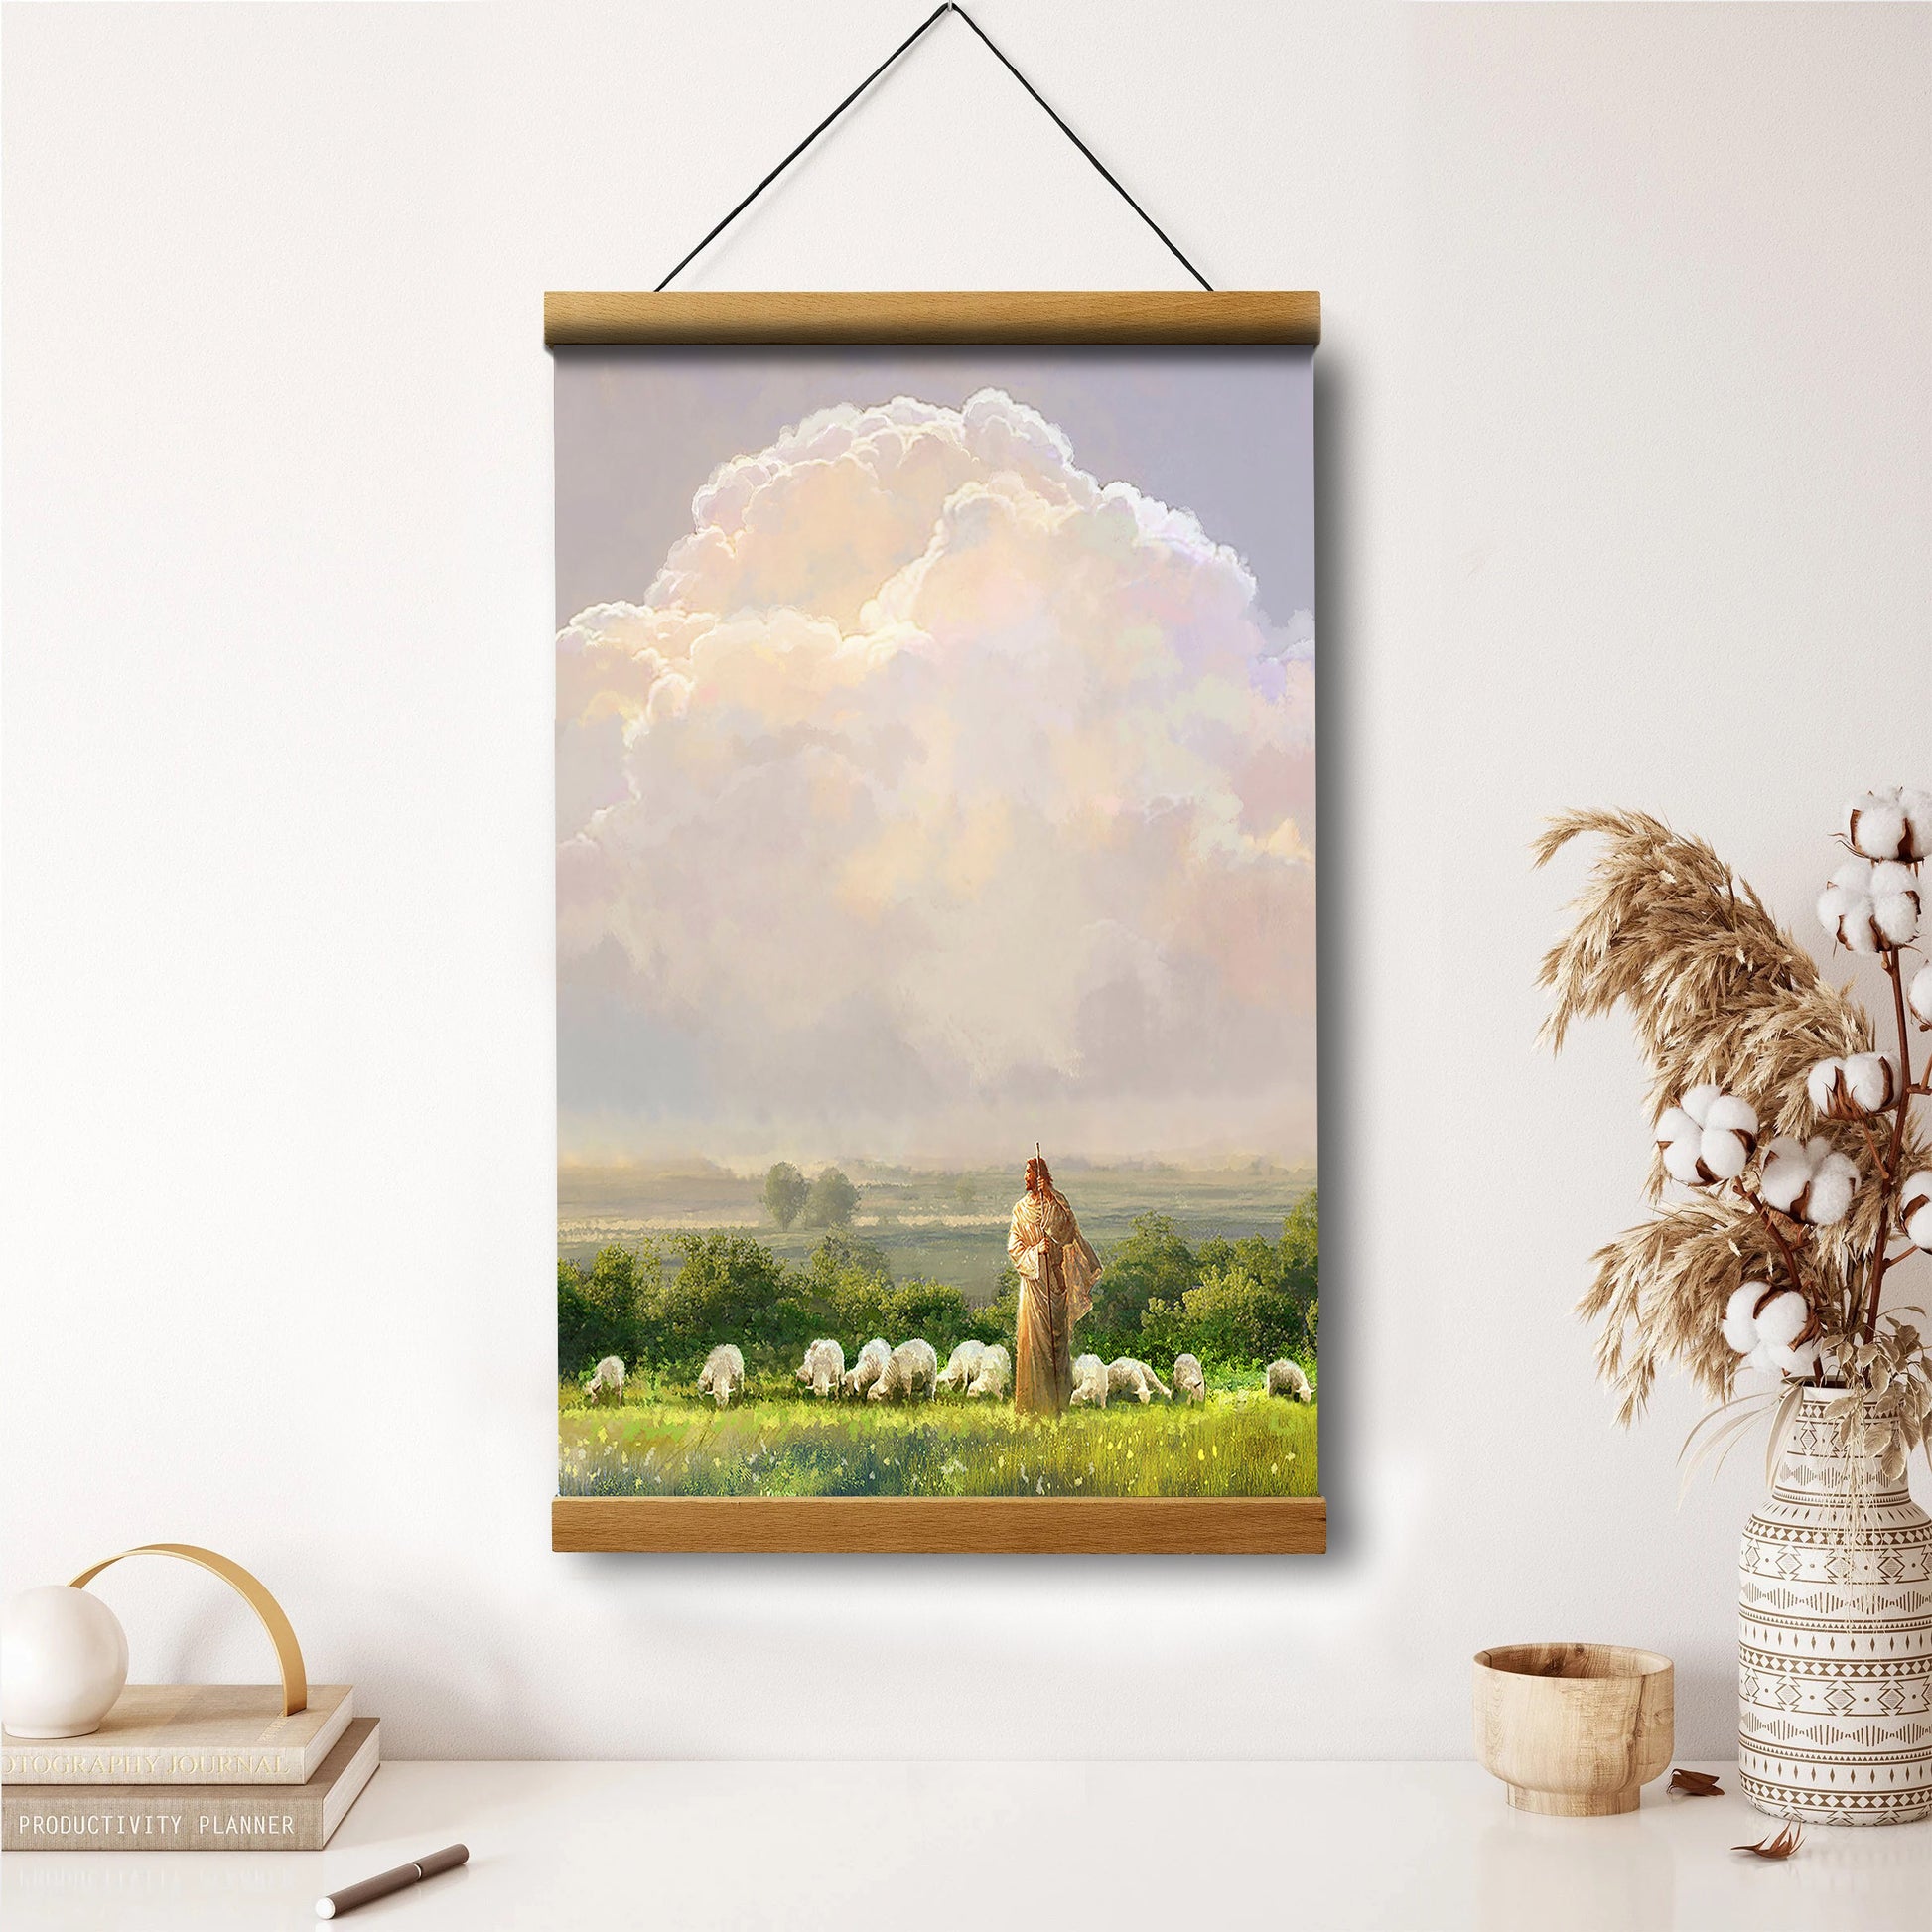 Jesus And The Lamb Picture - I Shall Not Want Portrait Hanging Canvas Wall Art - Christian Wall Decor - Religious Canvas